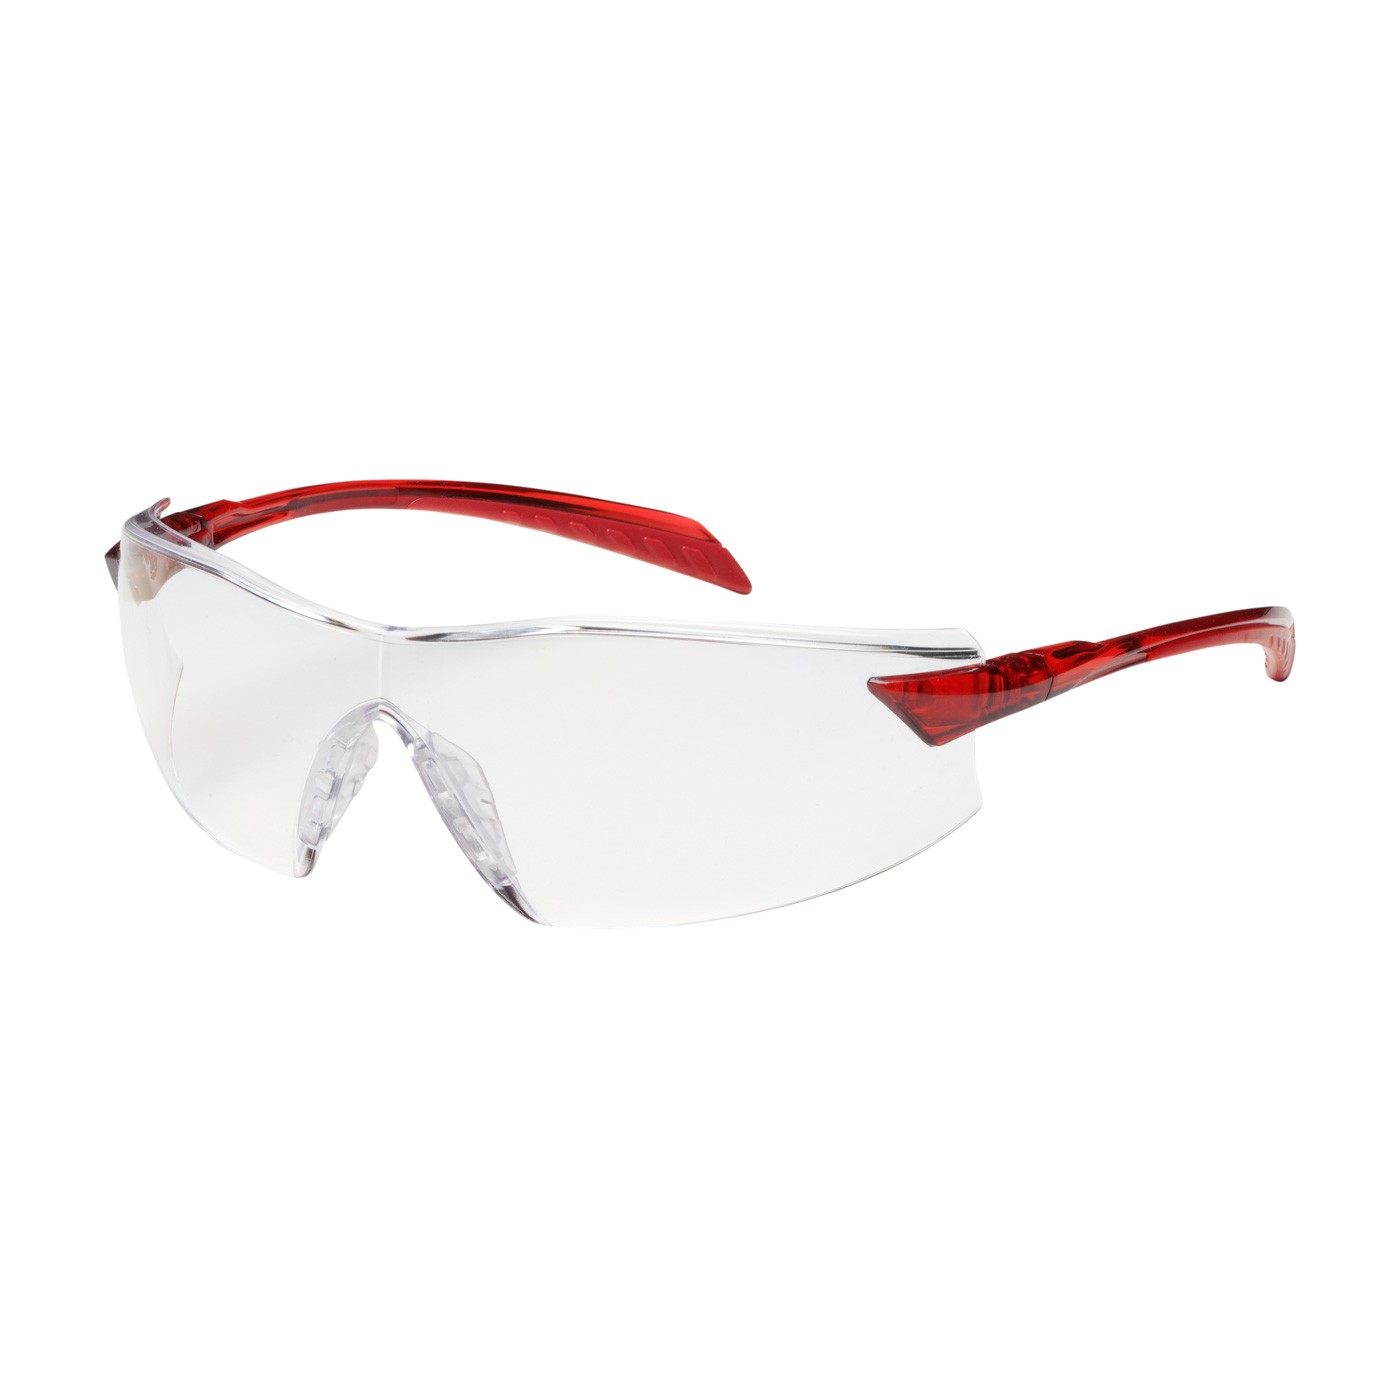 Radar™ Rimless Safety Glasses with Red Temple, Clear Lens and Anti-Scratch / Anti-Reflective Coating  (#250-45-1010)